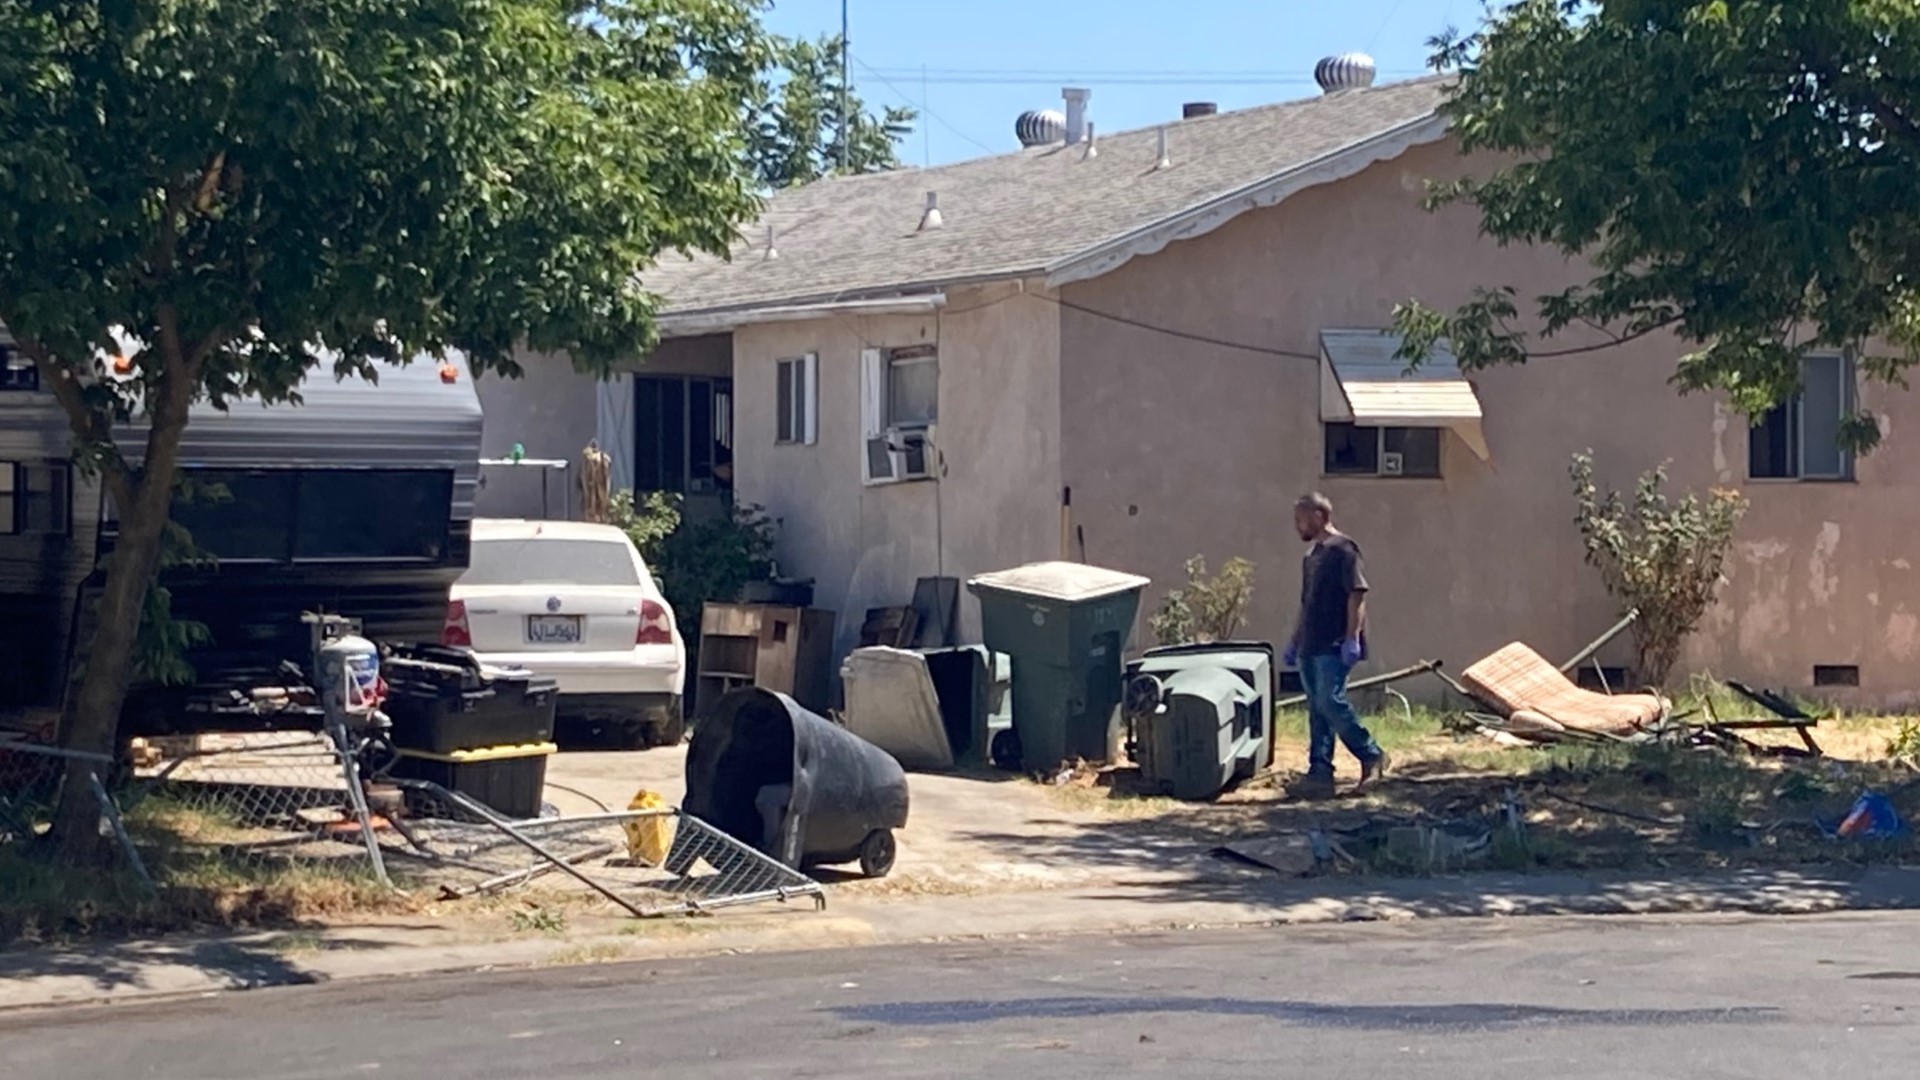 People in the home and nearby neighbors were evacuated, and SWAT and crisis negotiators came to the scene in an attempt to make contact with the man.